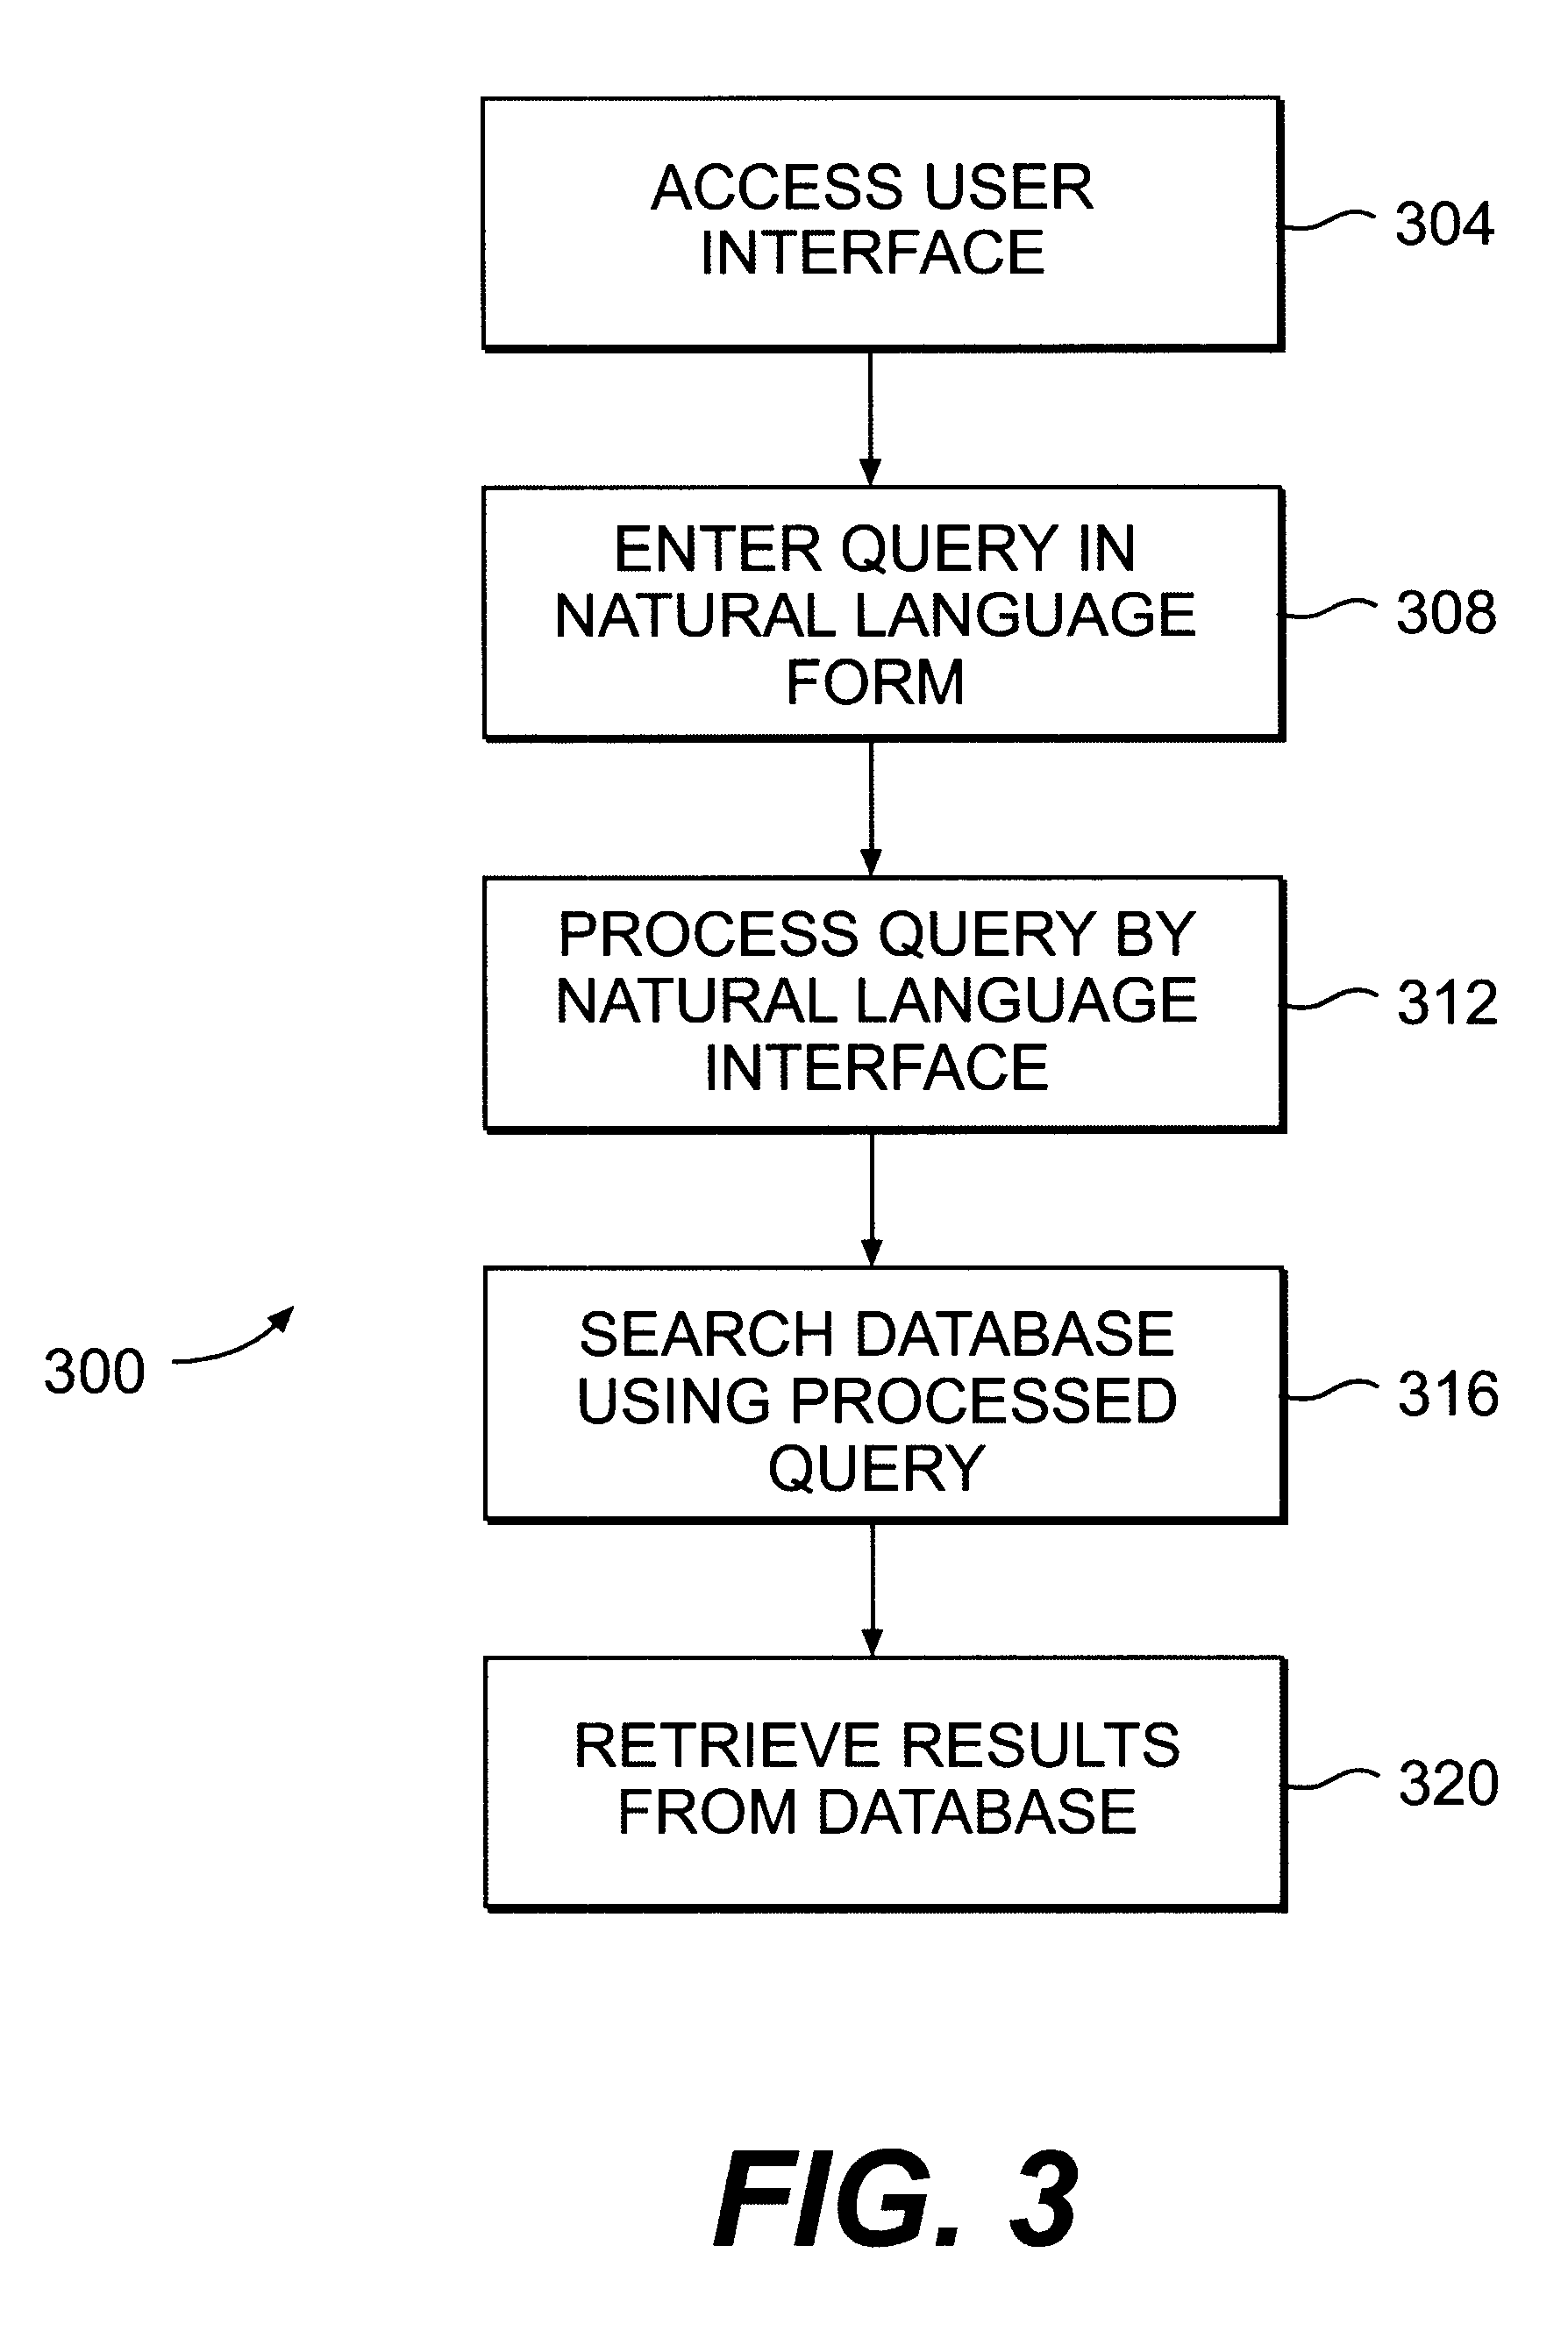 System and method for enhancing e-commerce using natural language interface for searching database